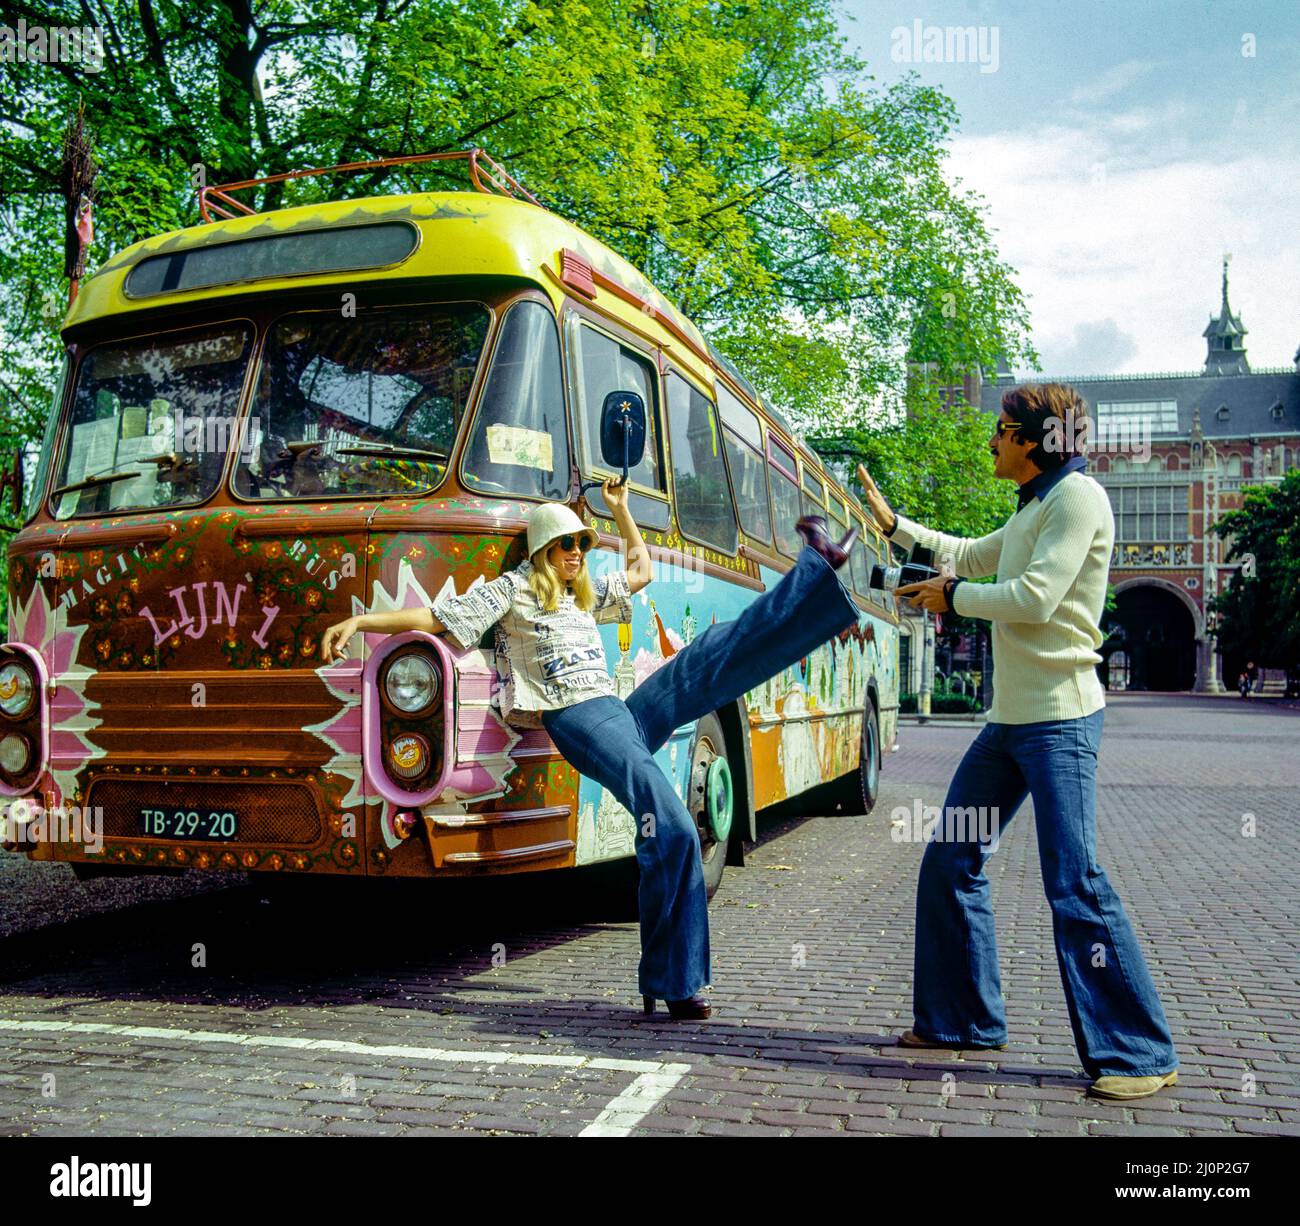 Vintage Amsterdam 1970s, couple taking funny pictures, hippy styled decorated van, Holland, Netherlands, Europe, Stock Photo